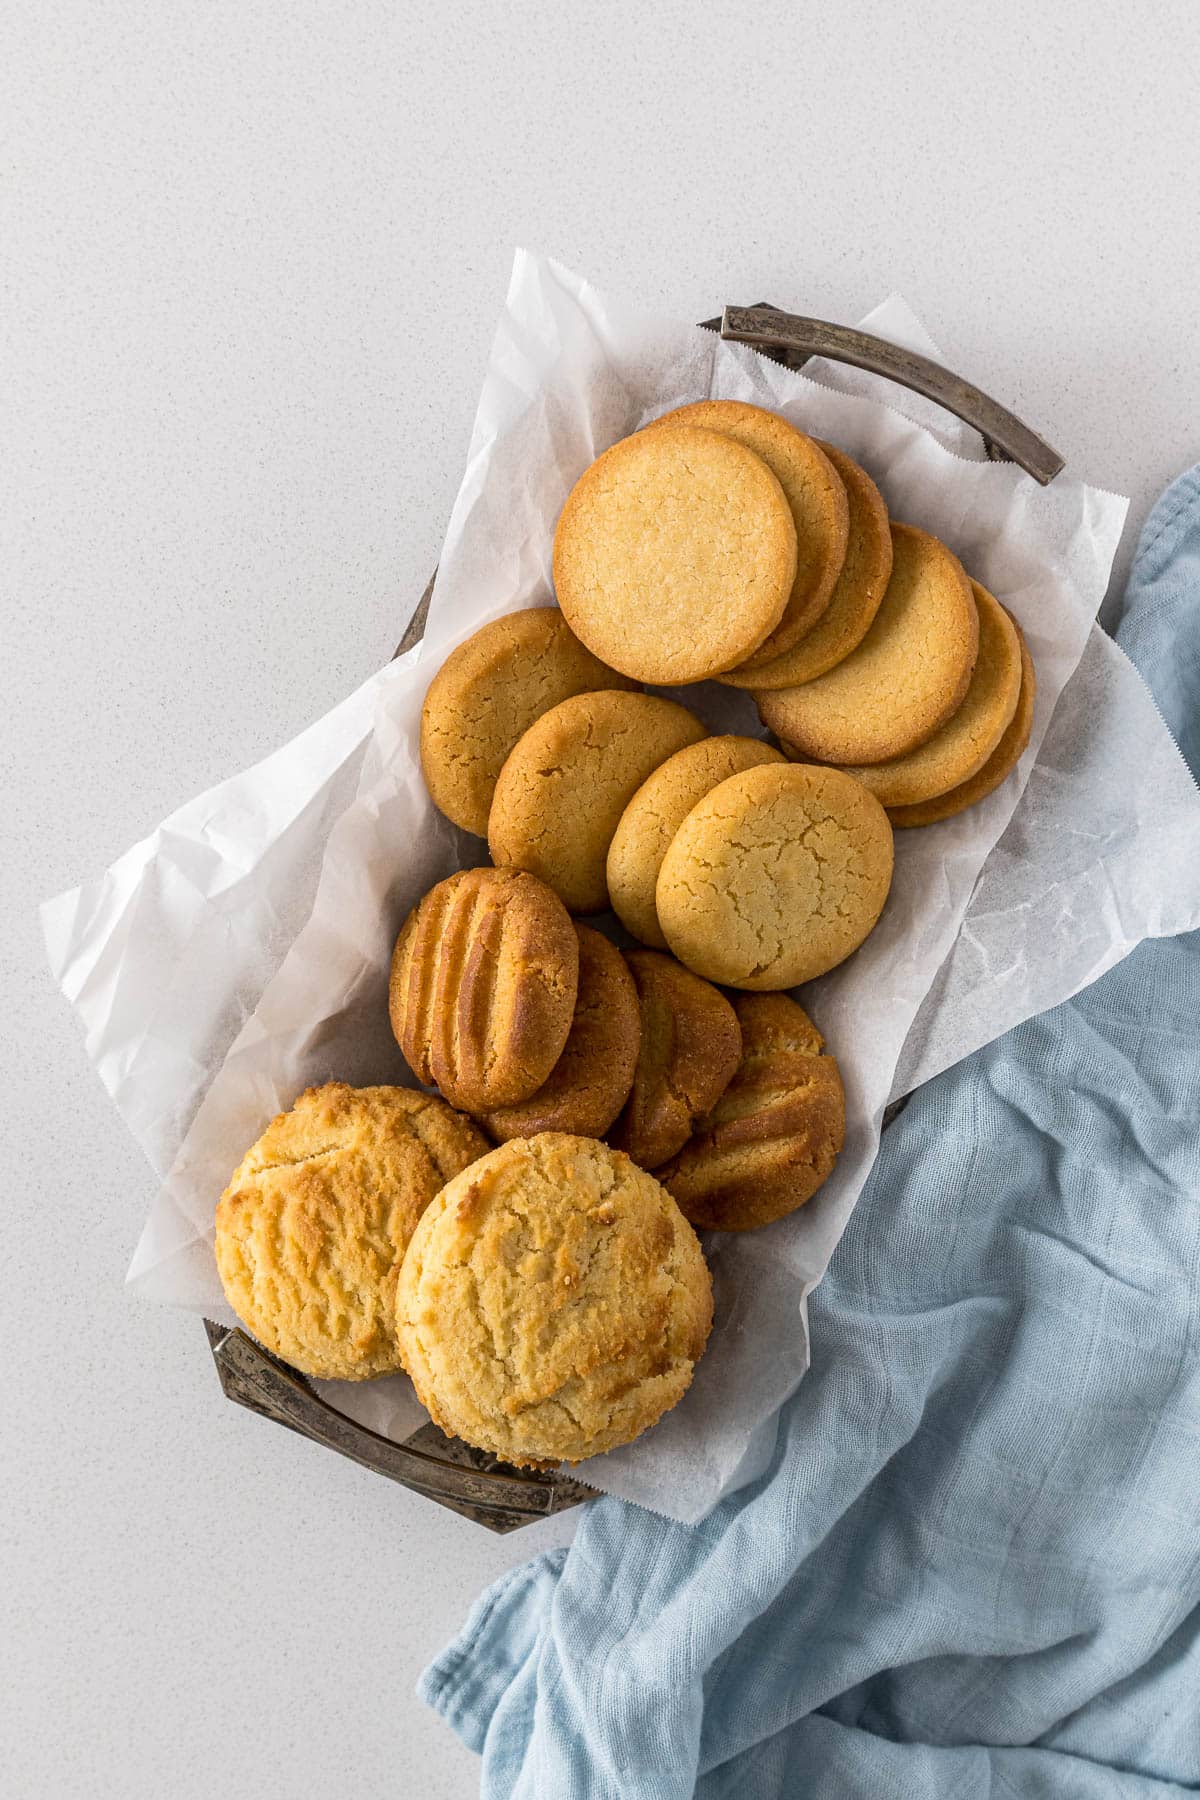 Assortment of condensed milk biscuits on a serving platter.